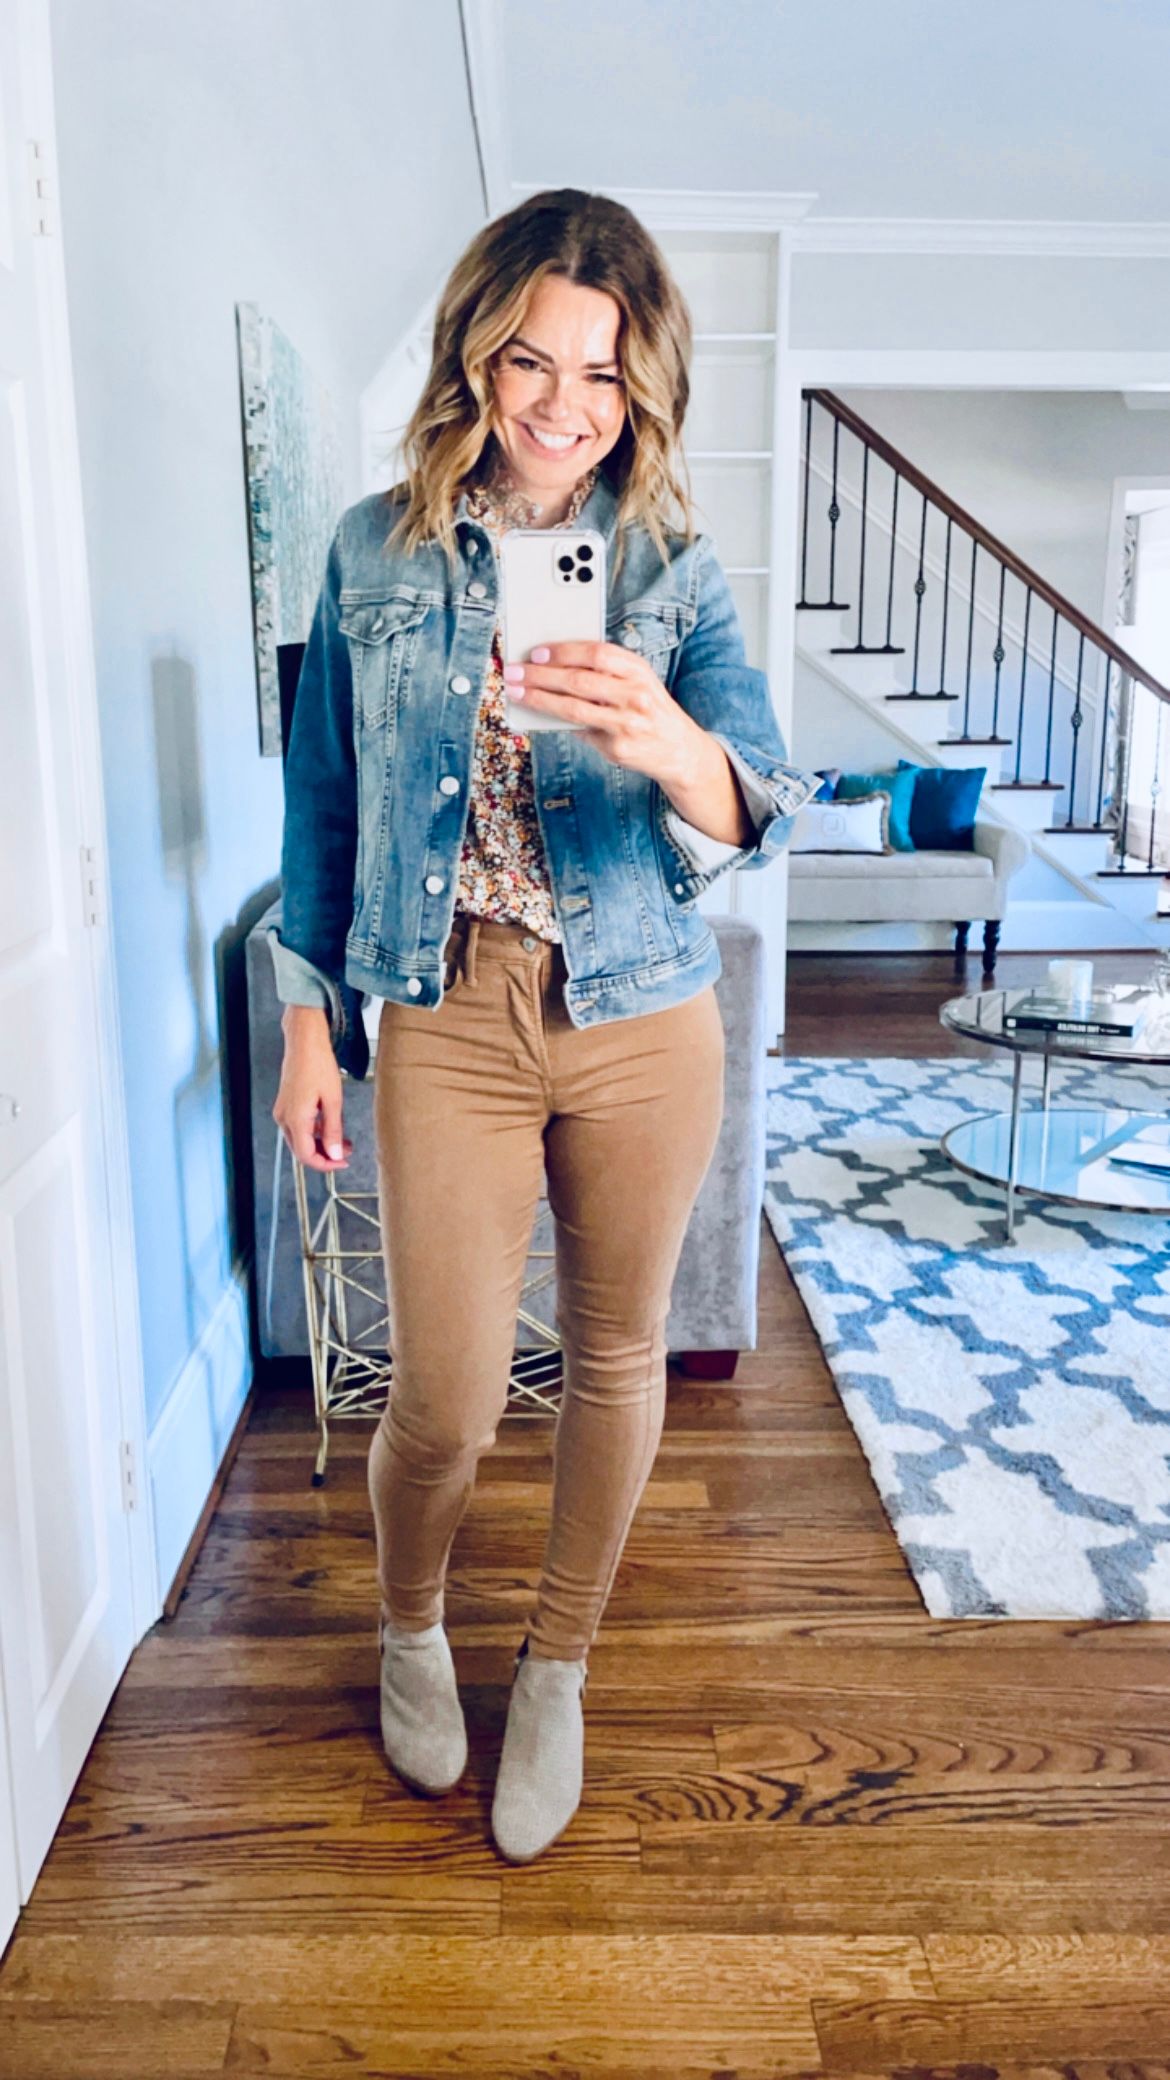 Smiling woman taking a full body selfie of her outfit - denim jacket, floral shirt, brown skinny corduroys and grey booties